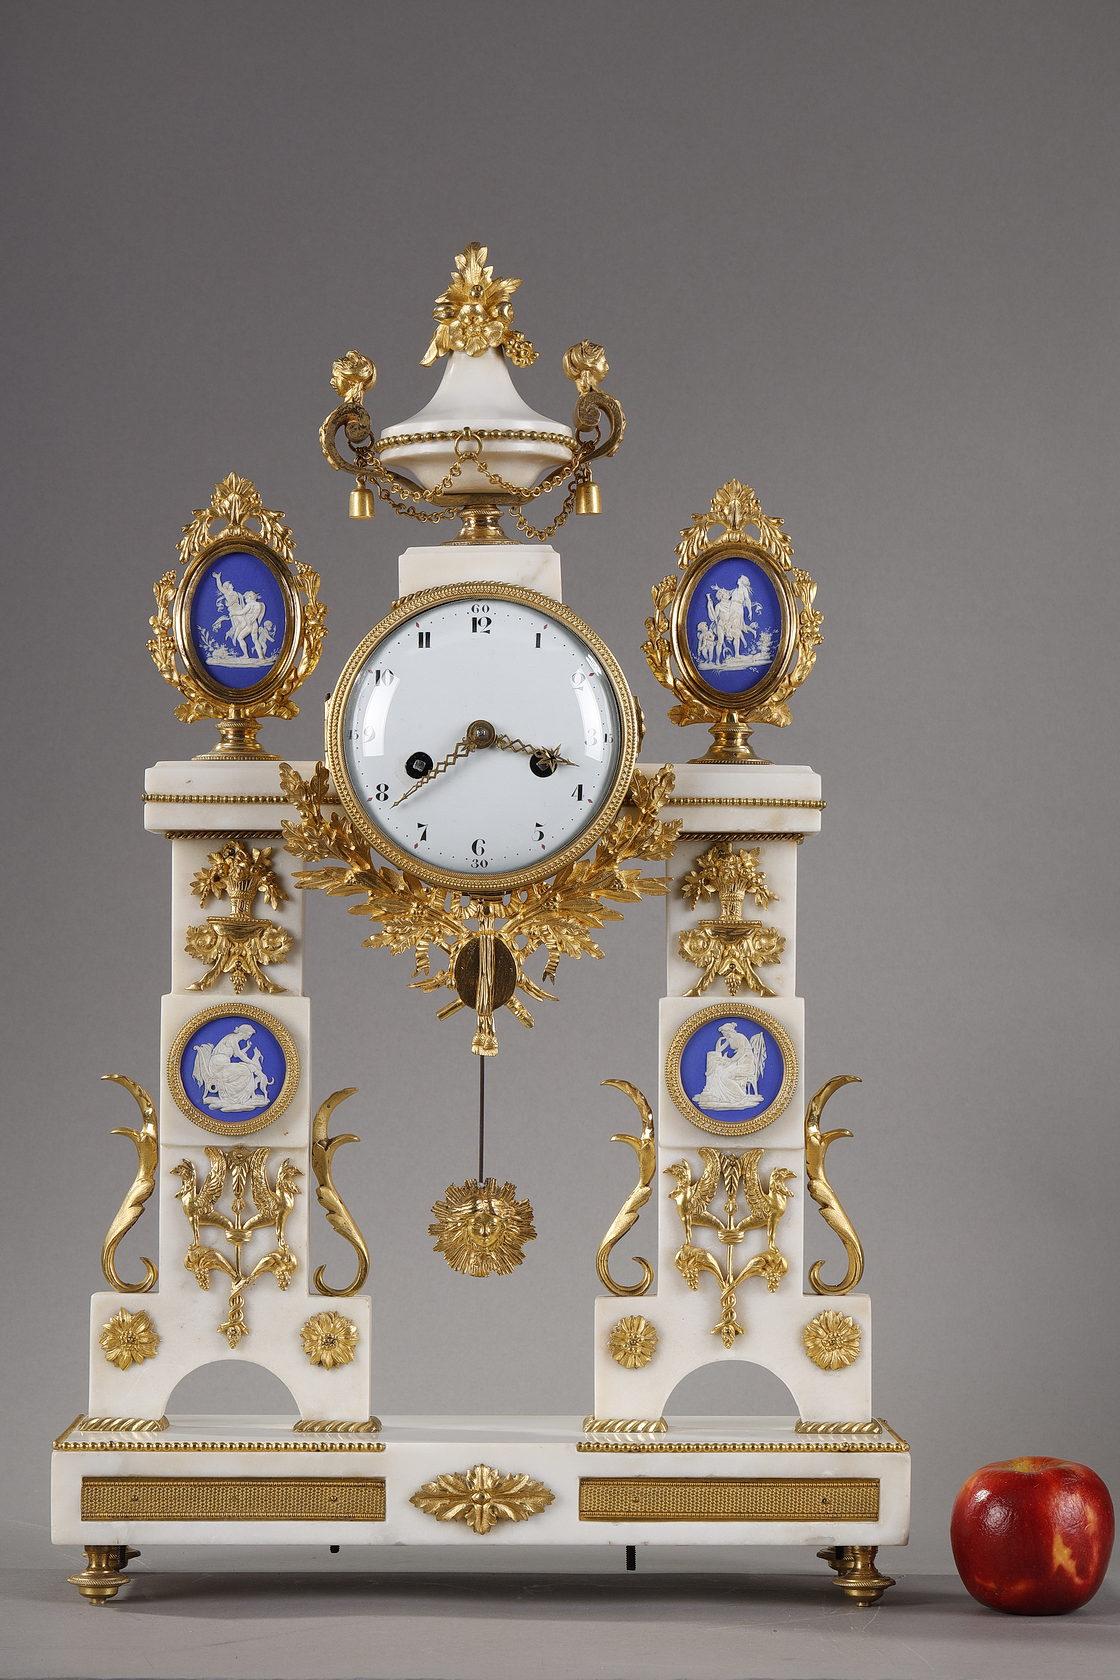 Large Louis XVI period portico clock in white marble, gilt bronze and blue earthenware in the Wedgwood style. The two posts are decorated with chased and gilt bronze motifs representing griffins, acanthus leaves, rosettes and vases overflowing with